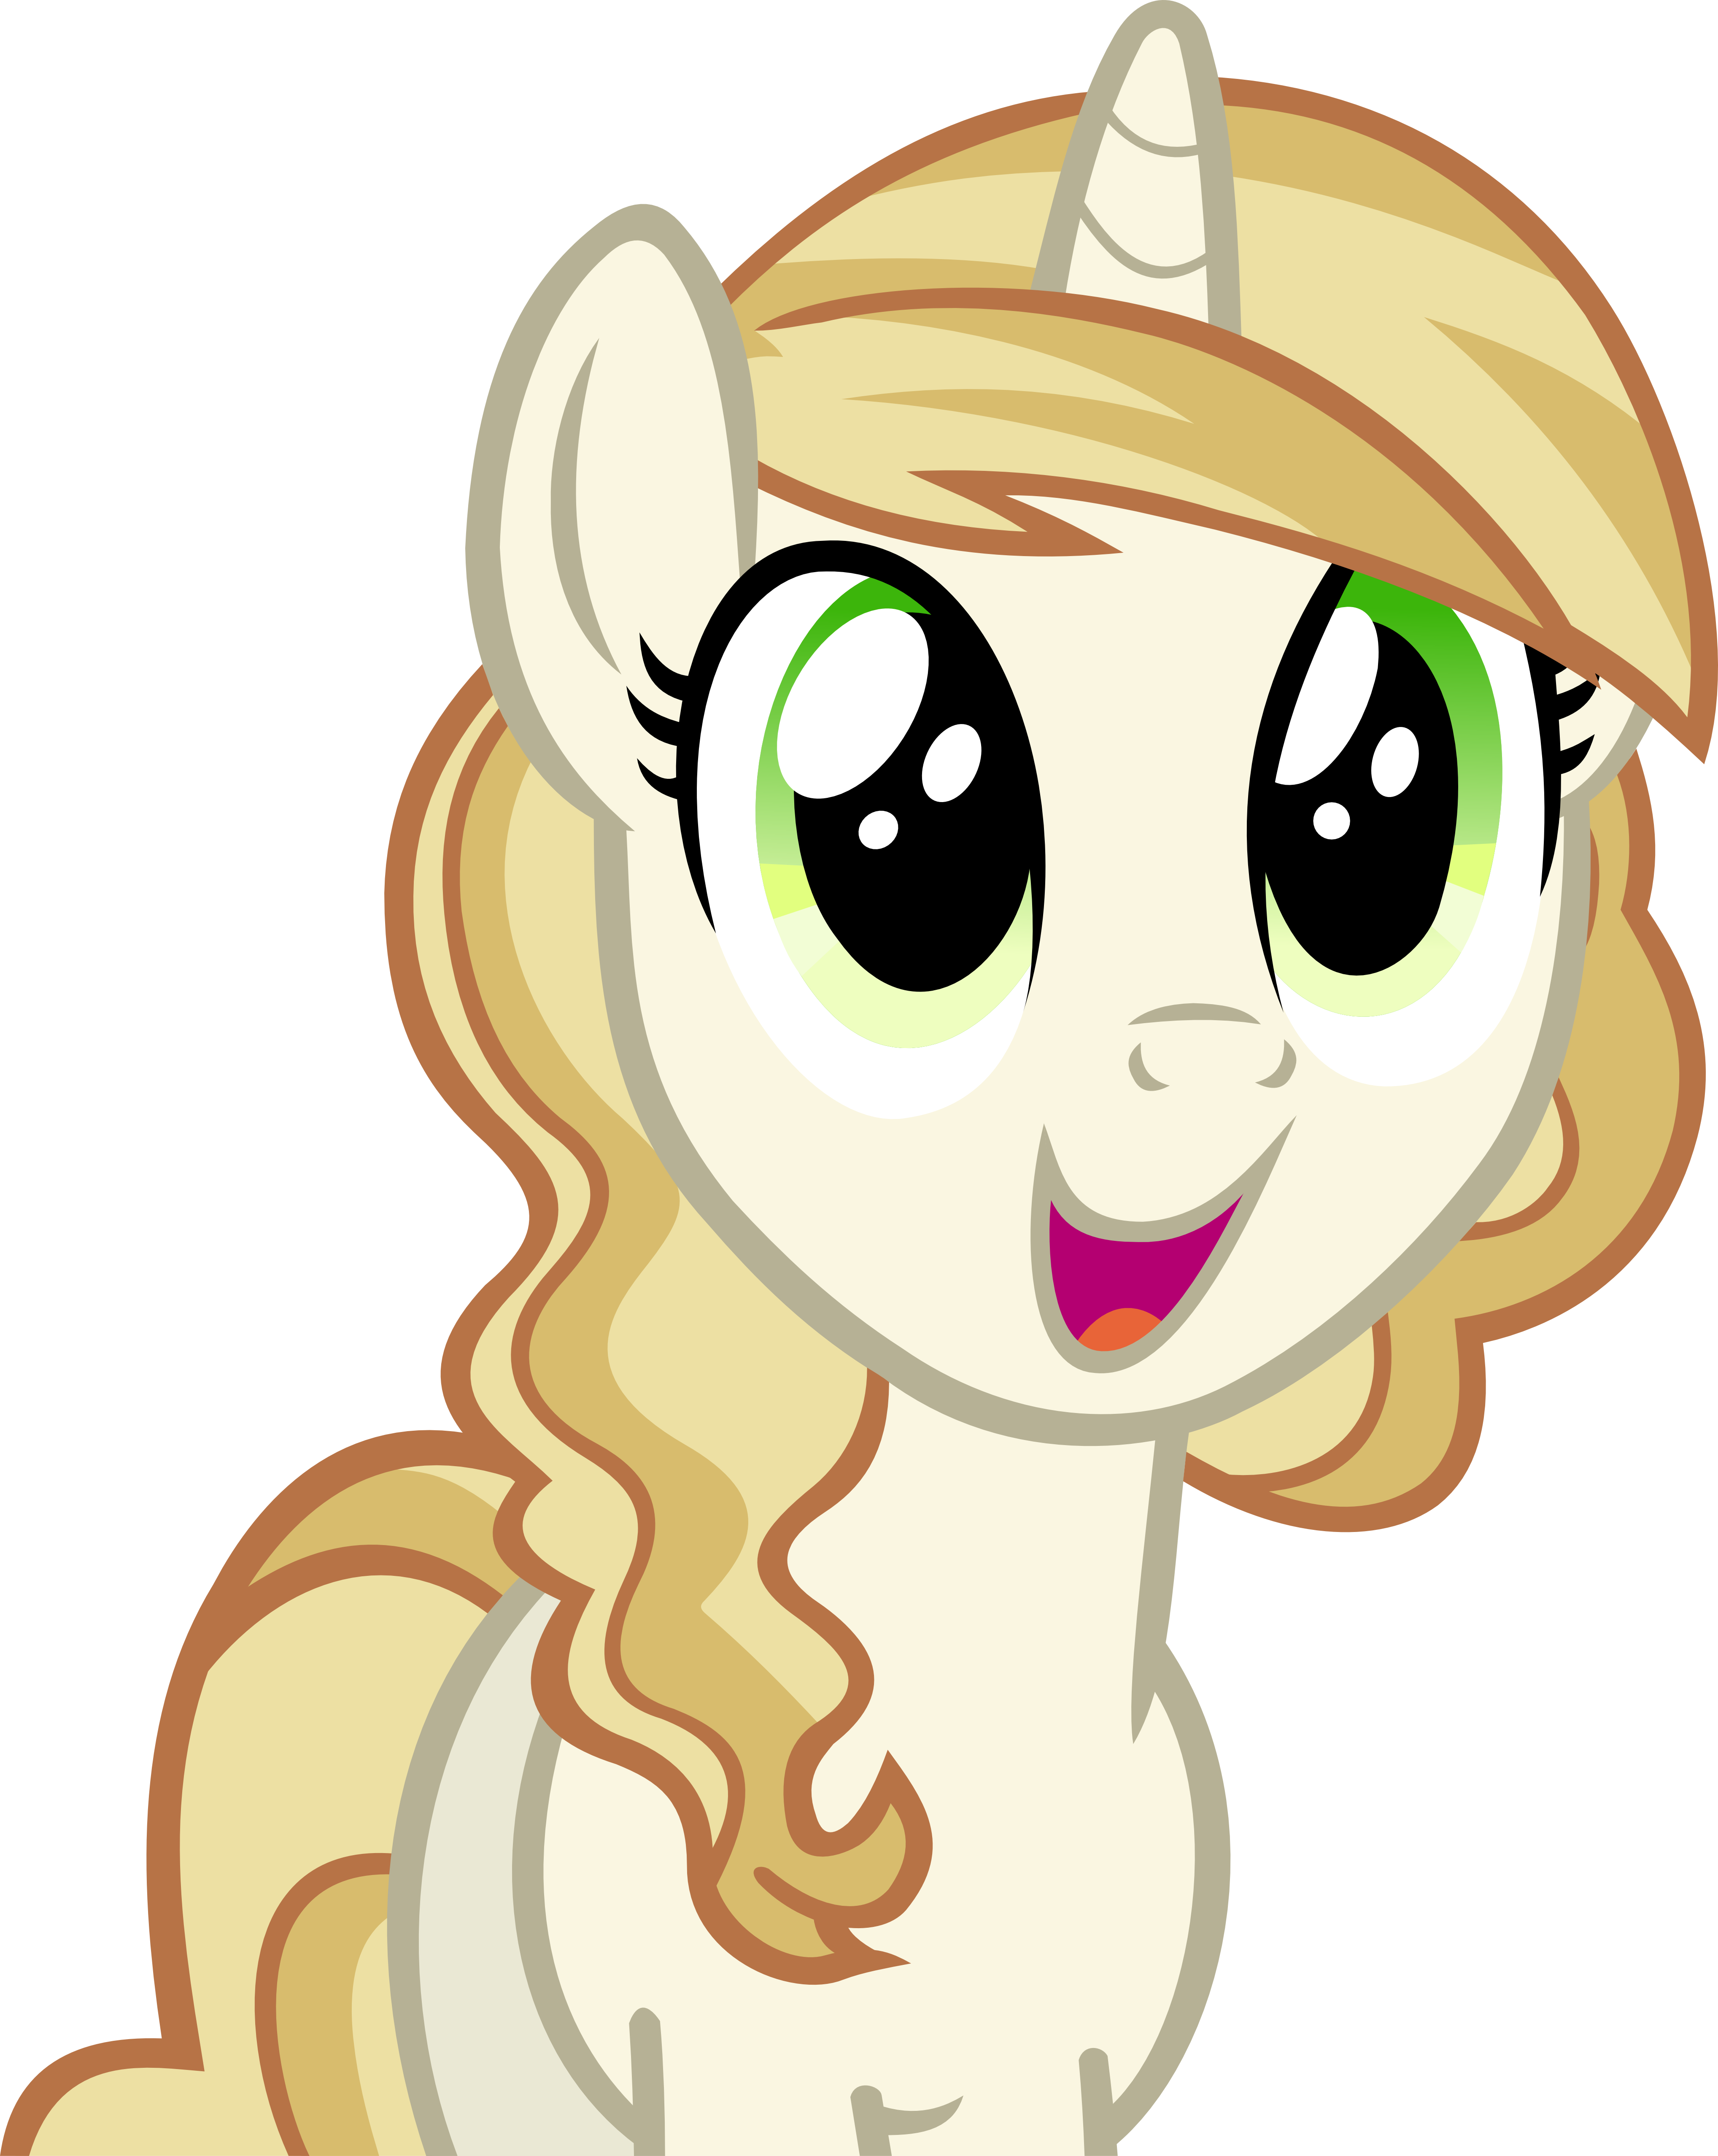 sweet_biscuit_in_glee_by_ironm17-dc88g8m